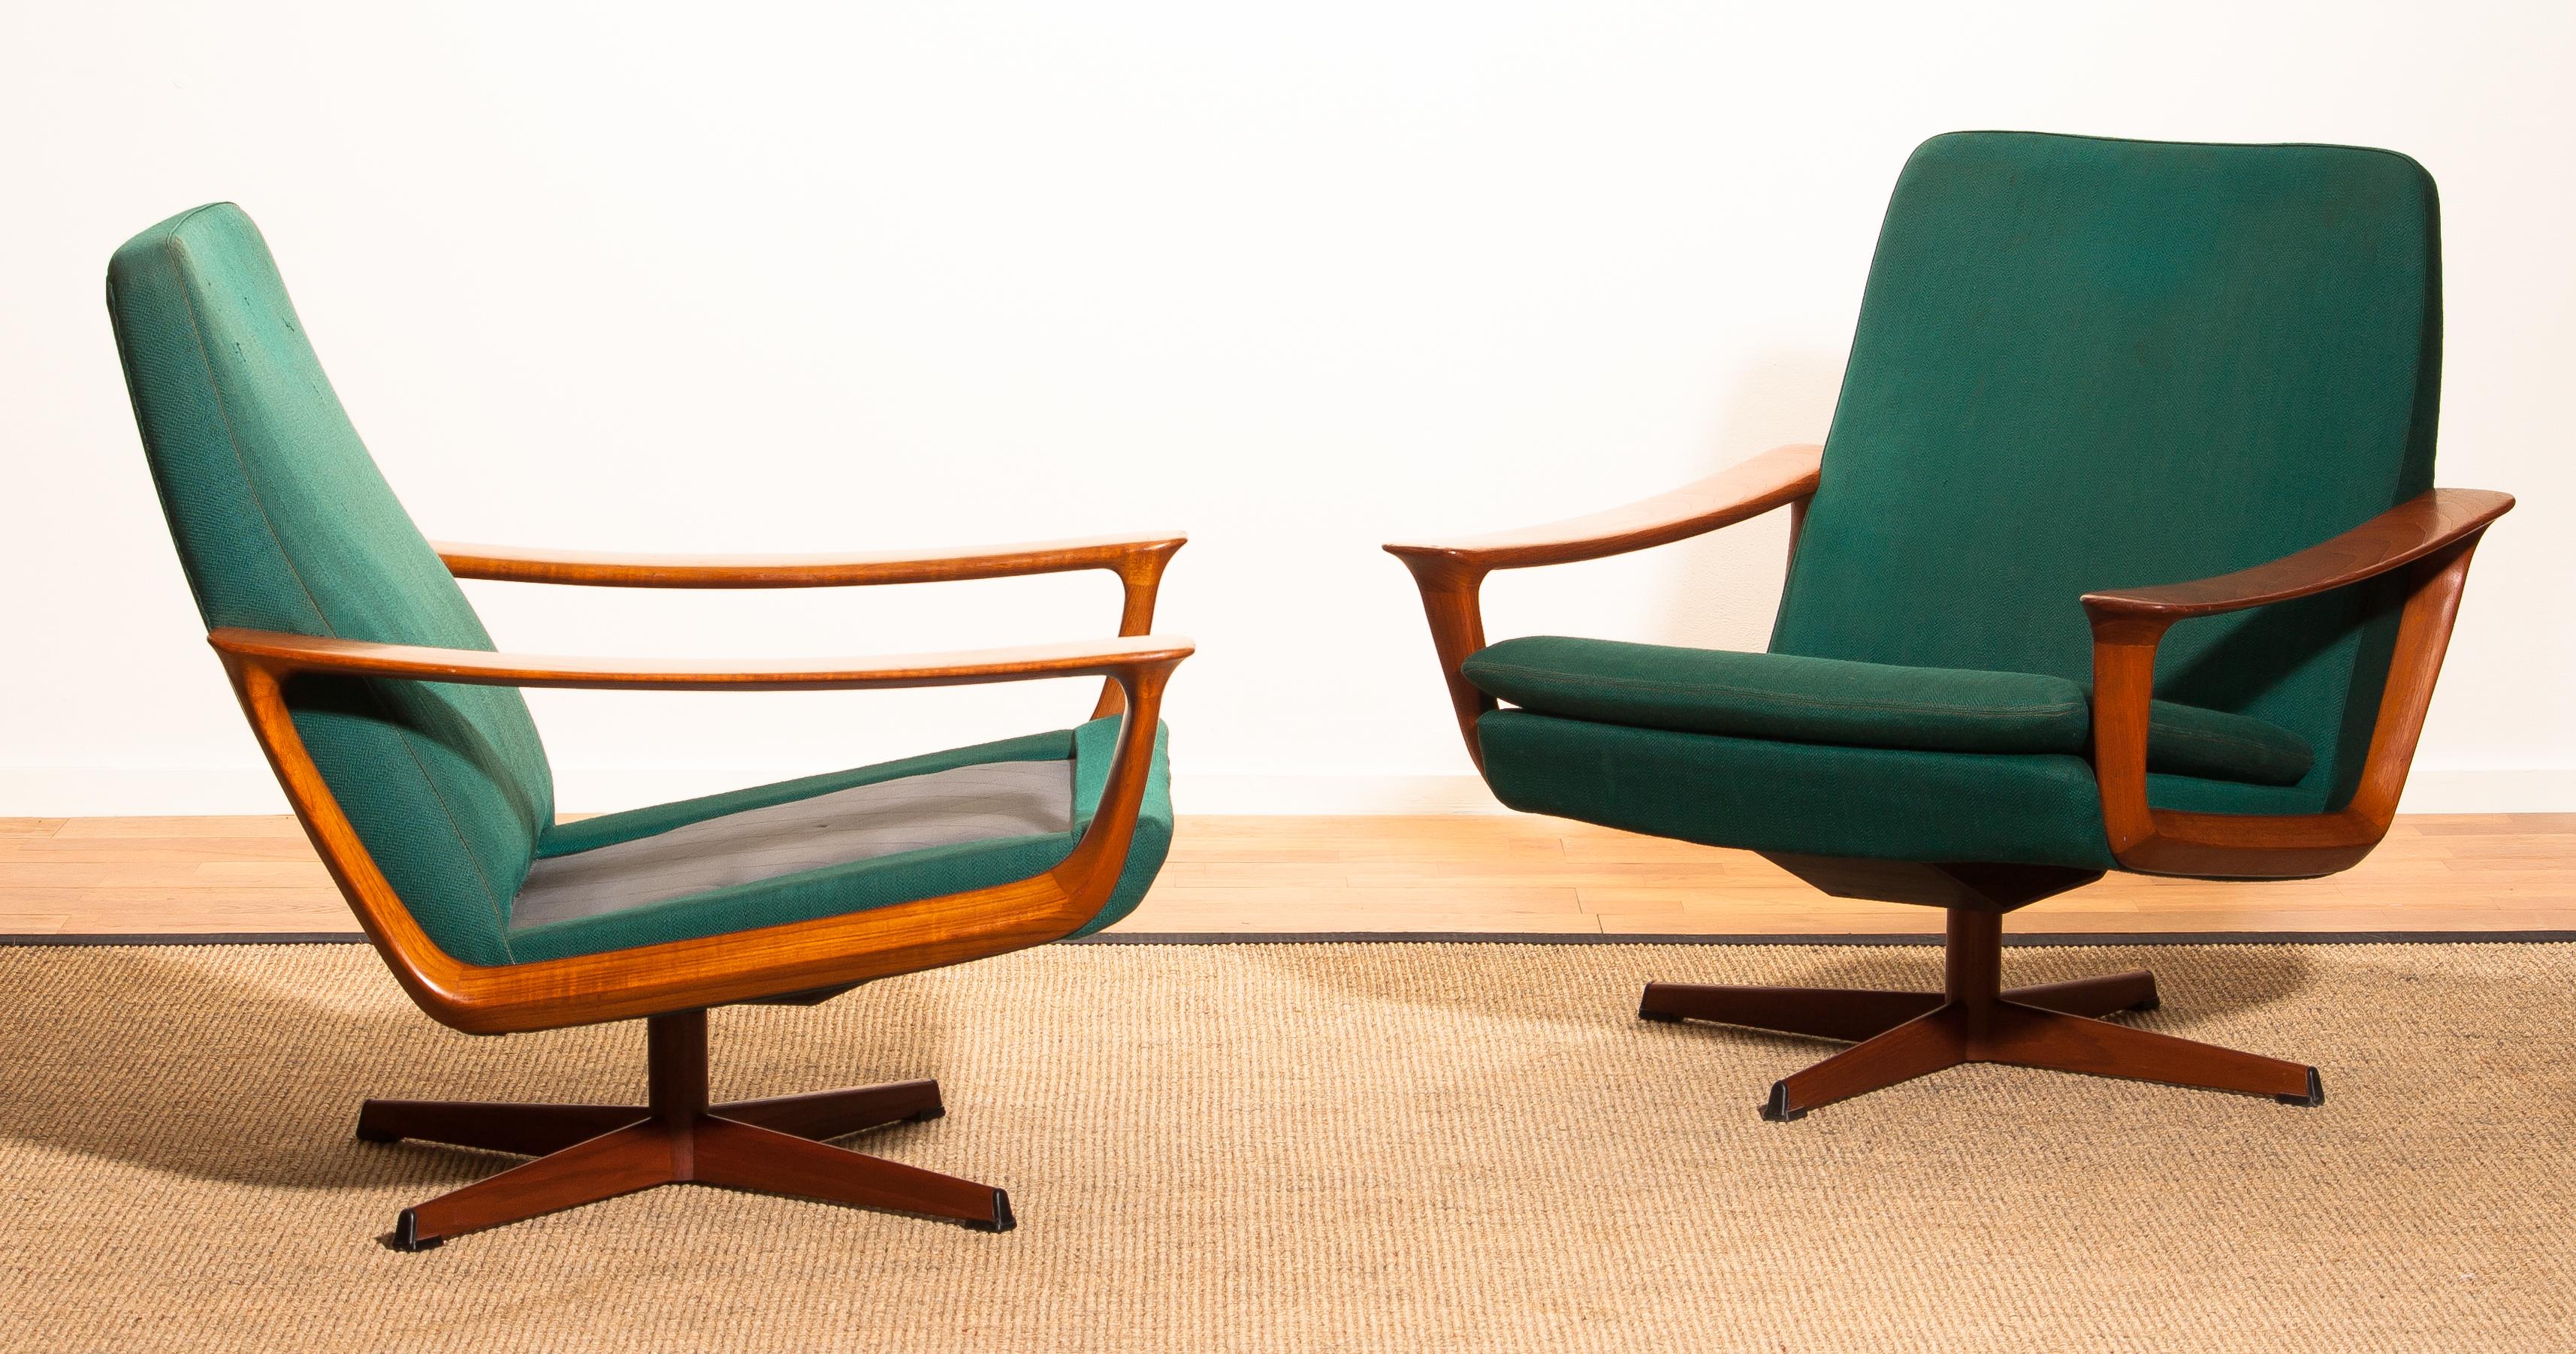 Mid-20th Century 1960s, Teak Set of Two Swivel Chairs by Johannes Andersson for Trensum, Denmark